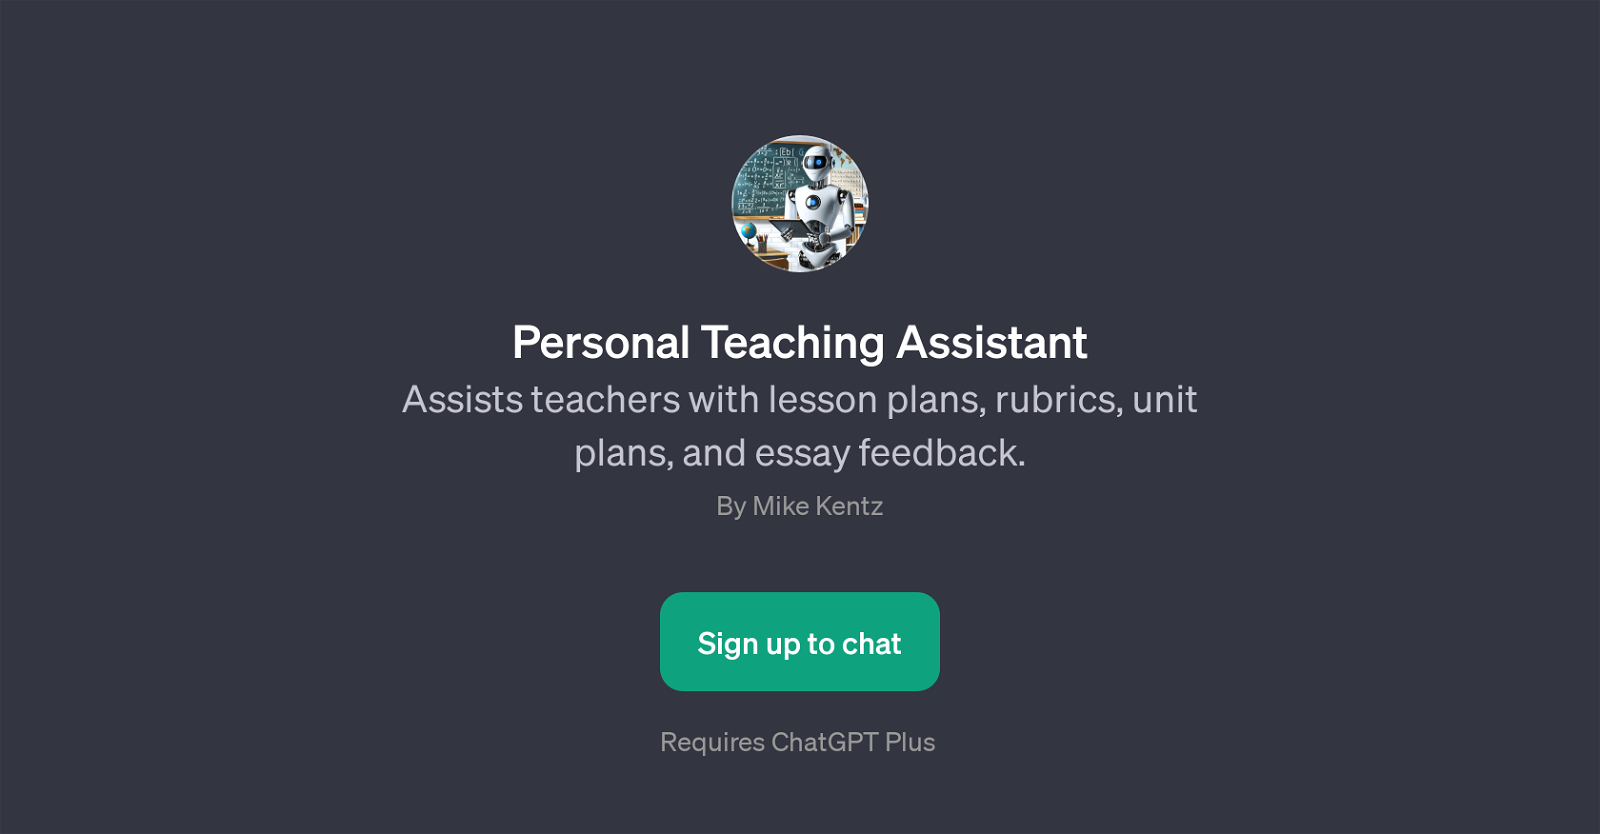 Personal Teaching Assistant website